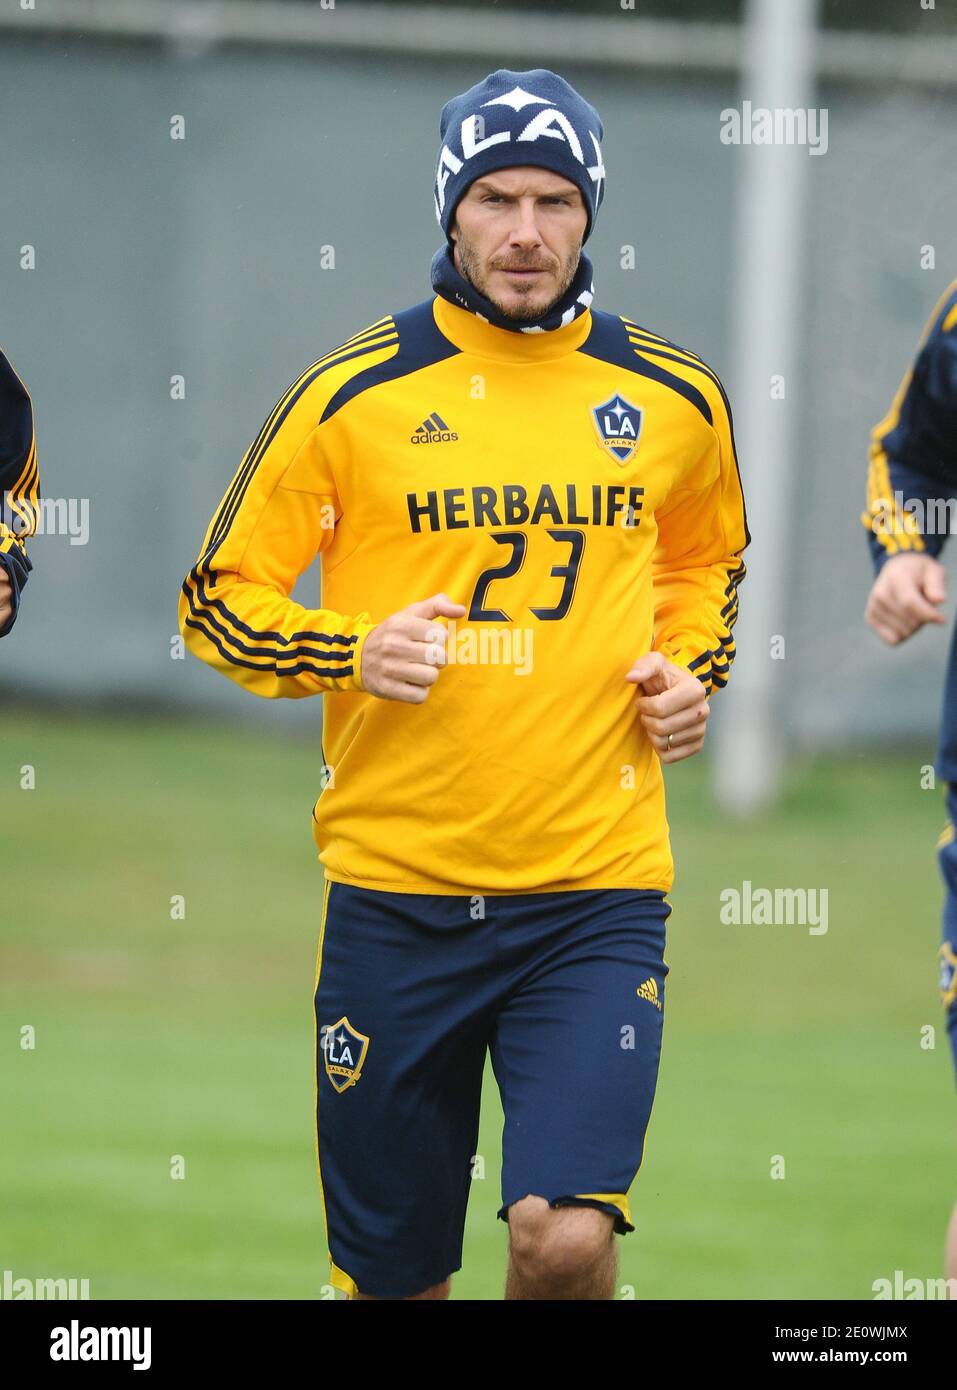 David Beckham during the LA Galaxy training session prior the 2012 MLS Cup at The Home Depot Center in Los Angeles, CA, USA on November 29, 2012. Photo by Lionel Hahn/ABACAPRESS.COM Stock Photo